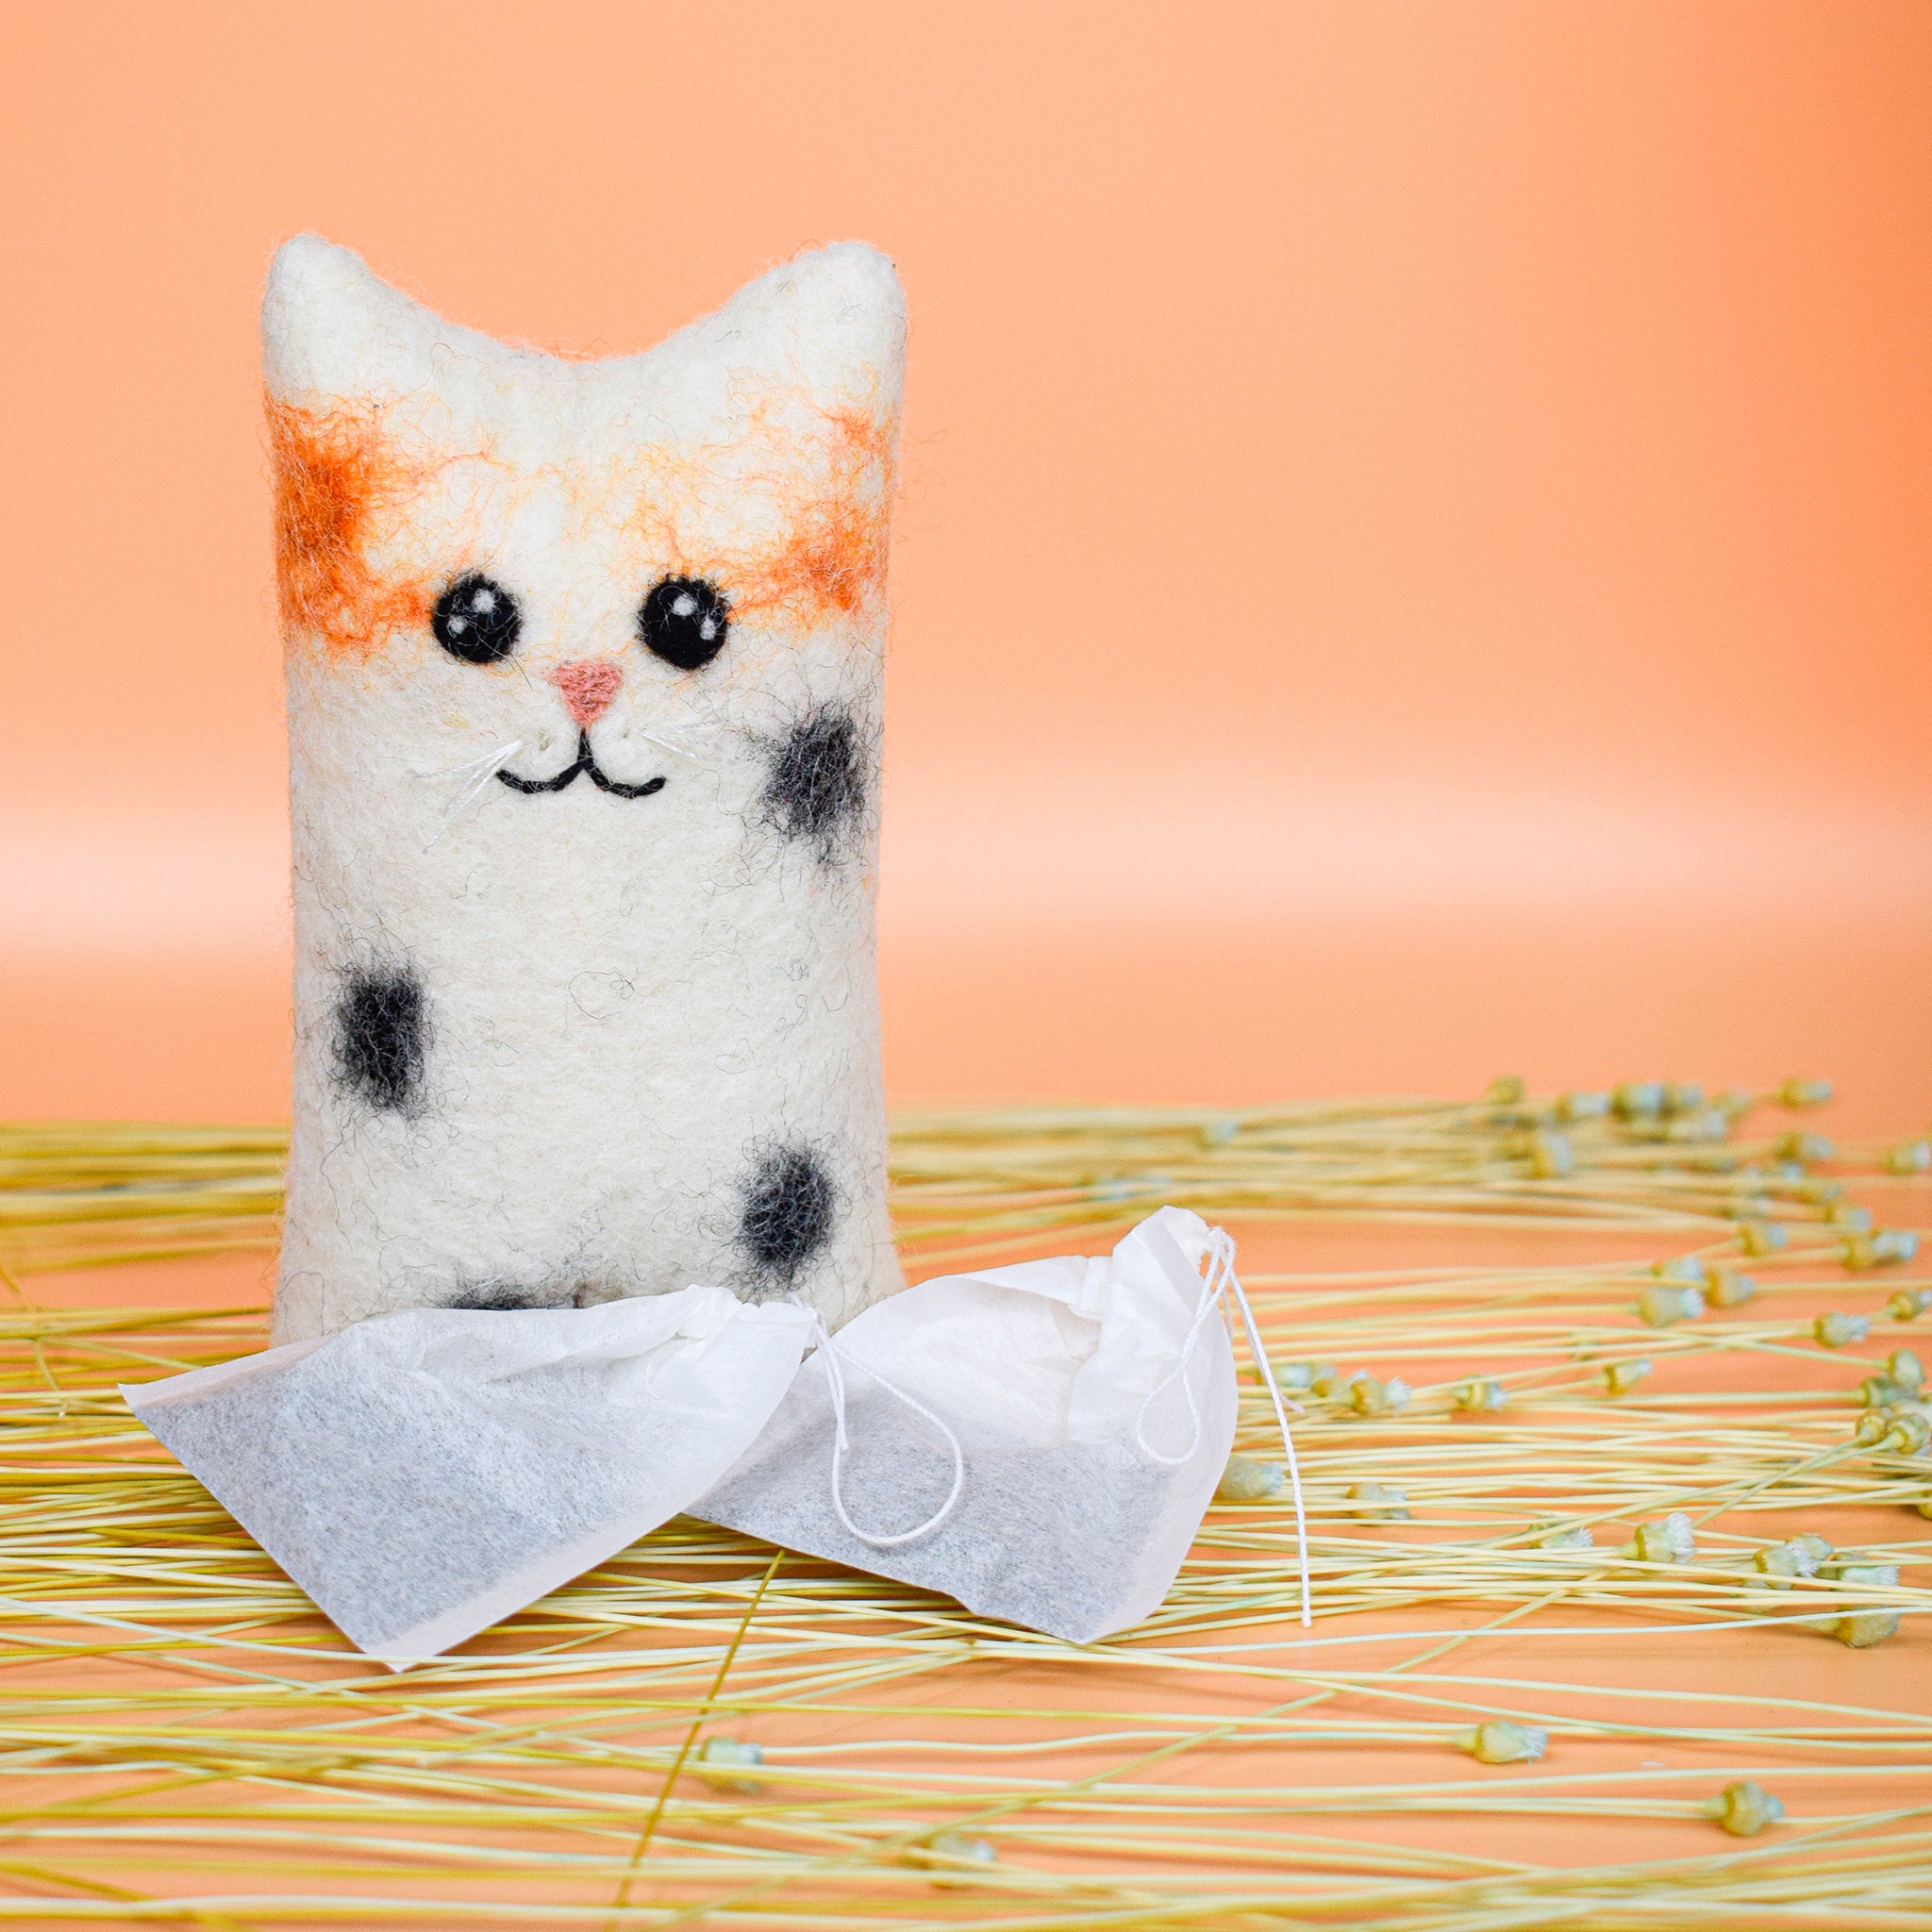 small white hooman's friend cat toy made of felted wool